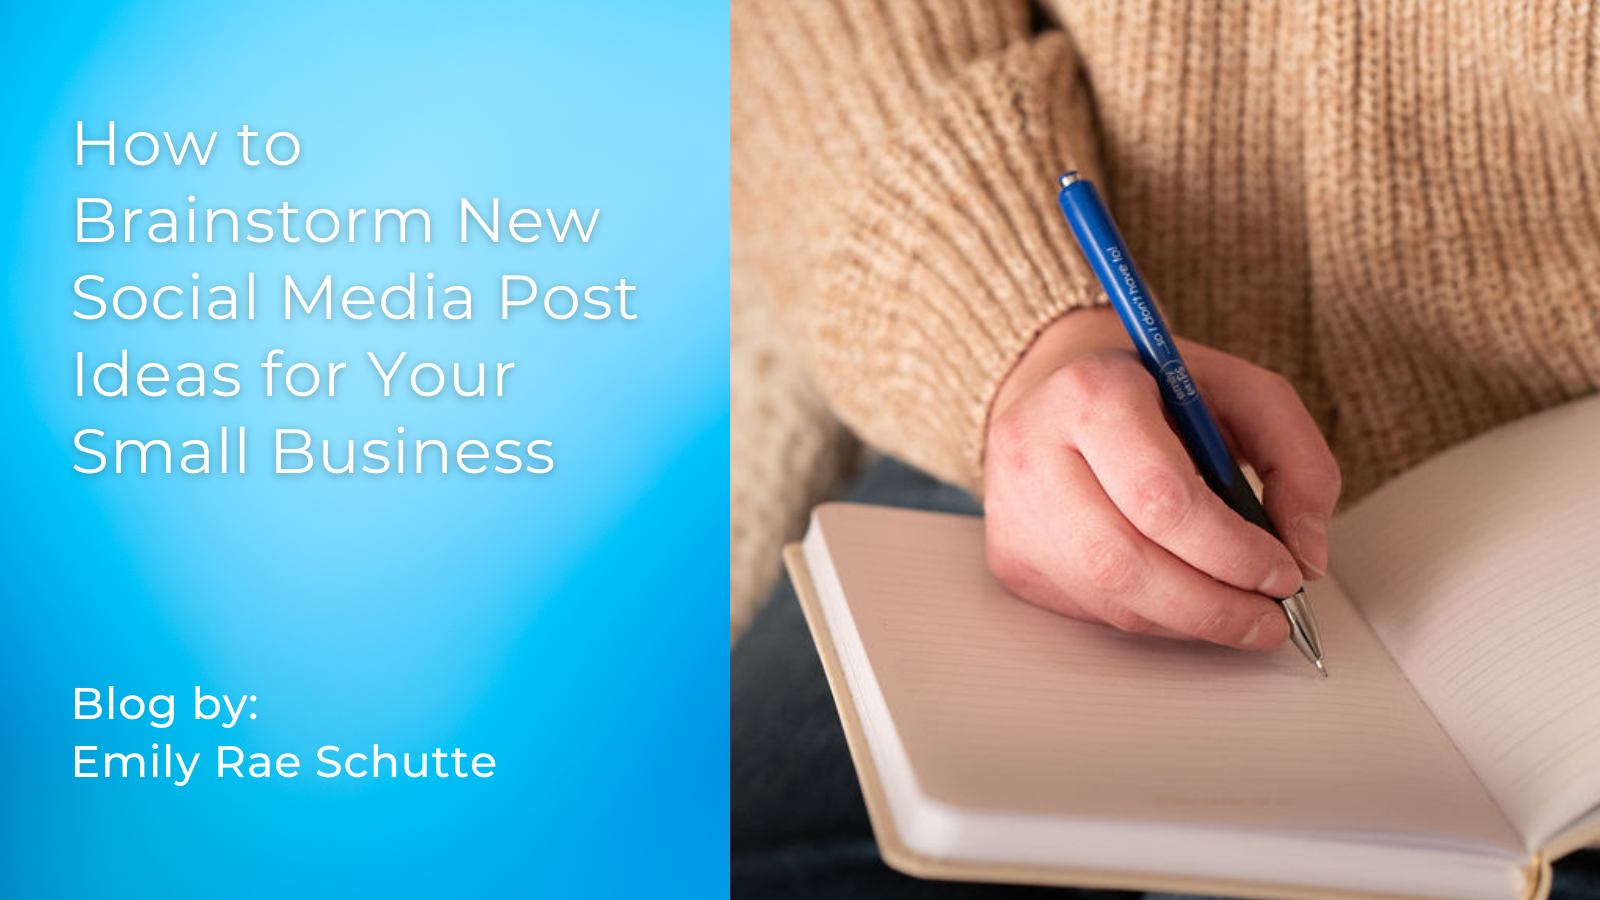 How to Brainstorm New Social Media Post Ideas for Your Small Business